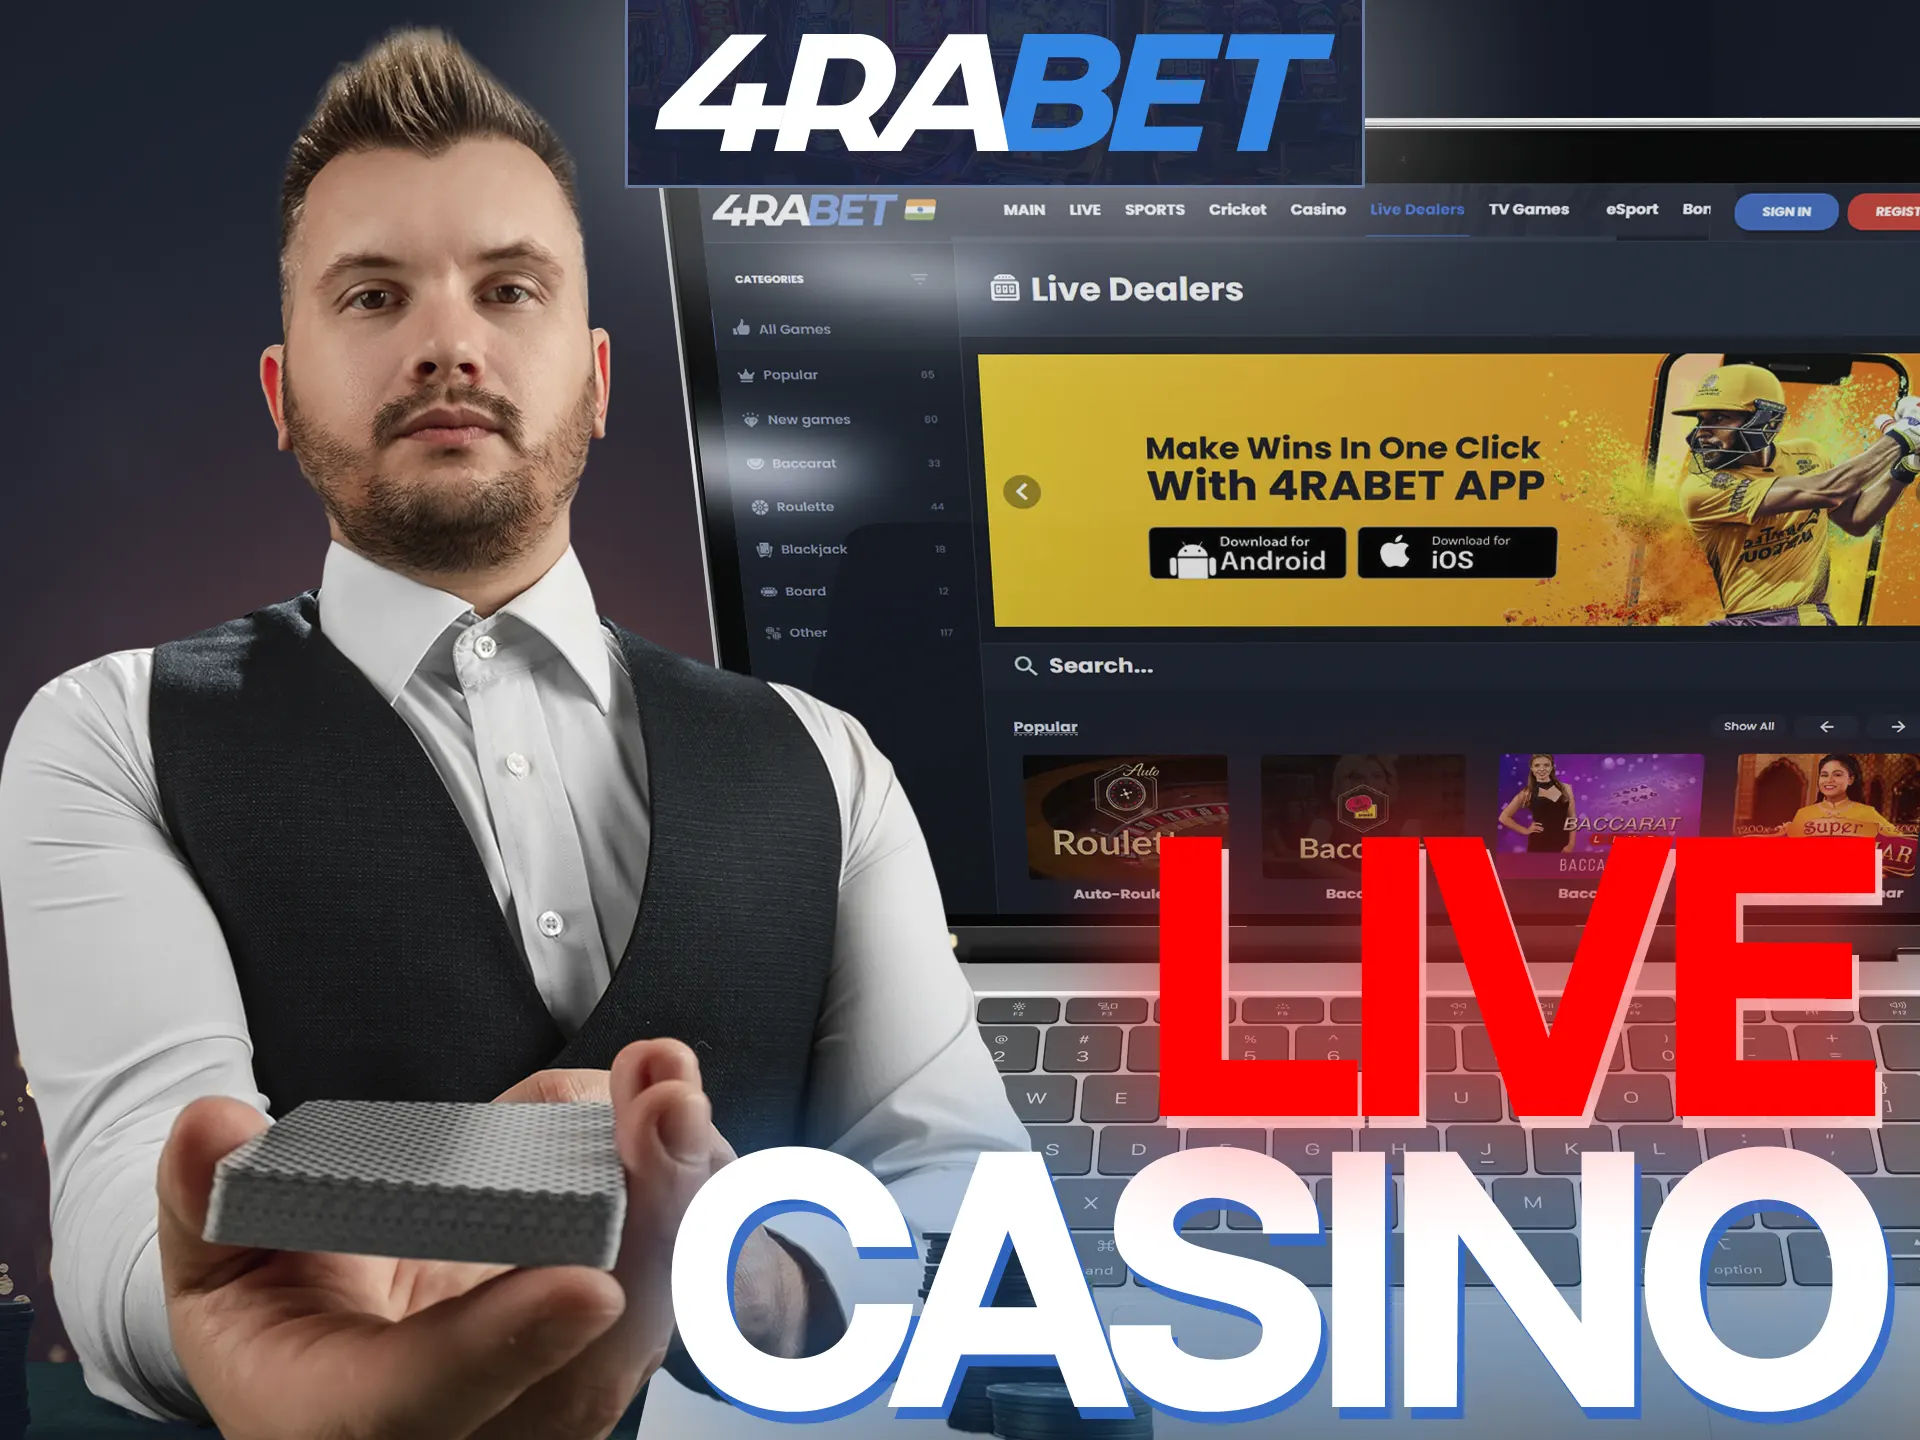 Play live casino games on the 4Rabet website.